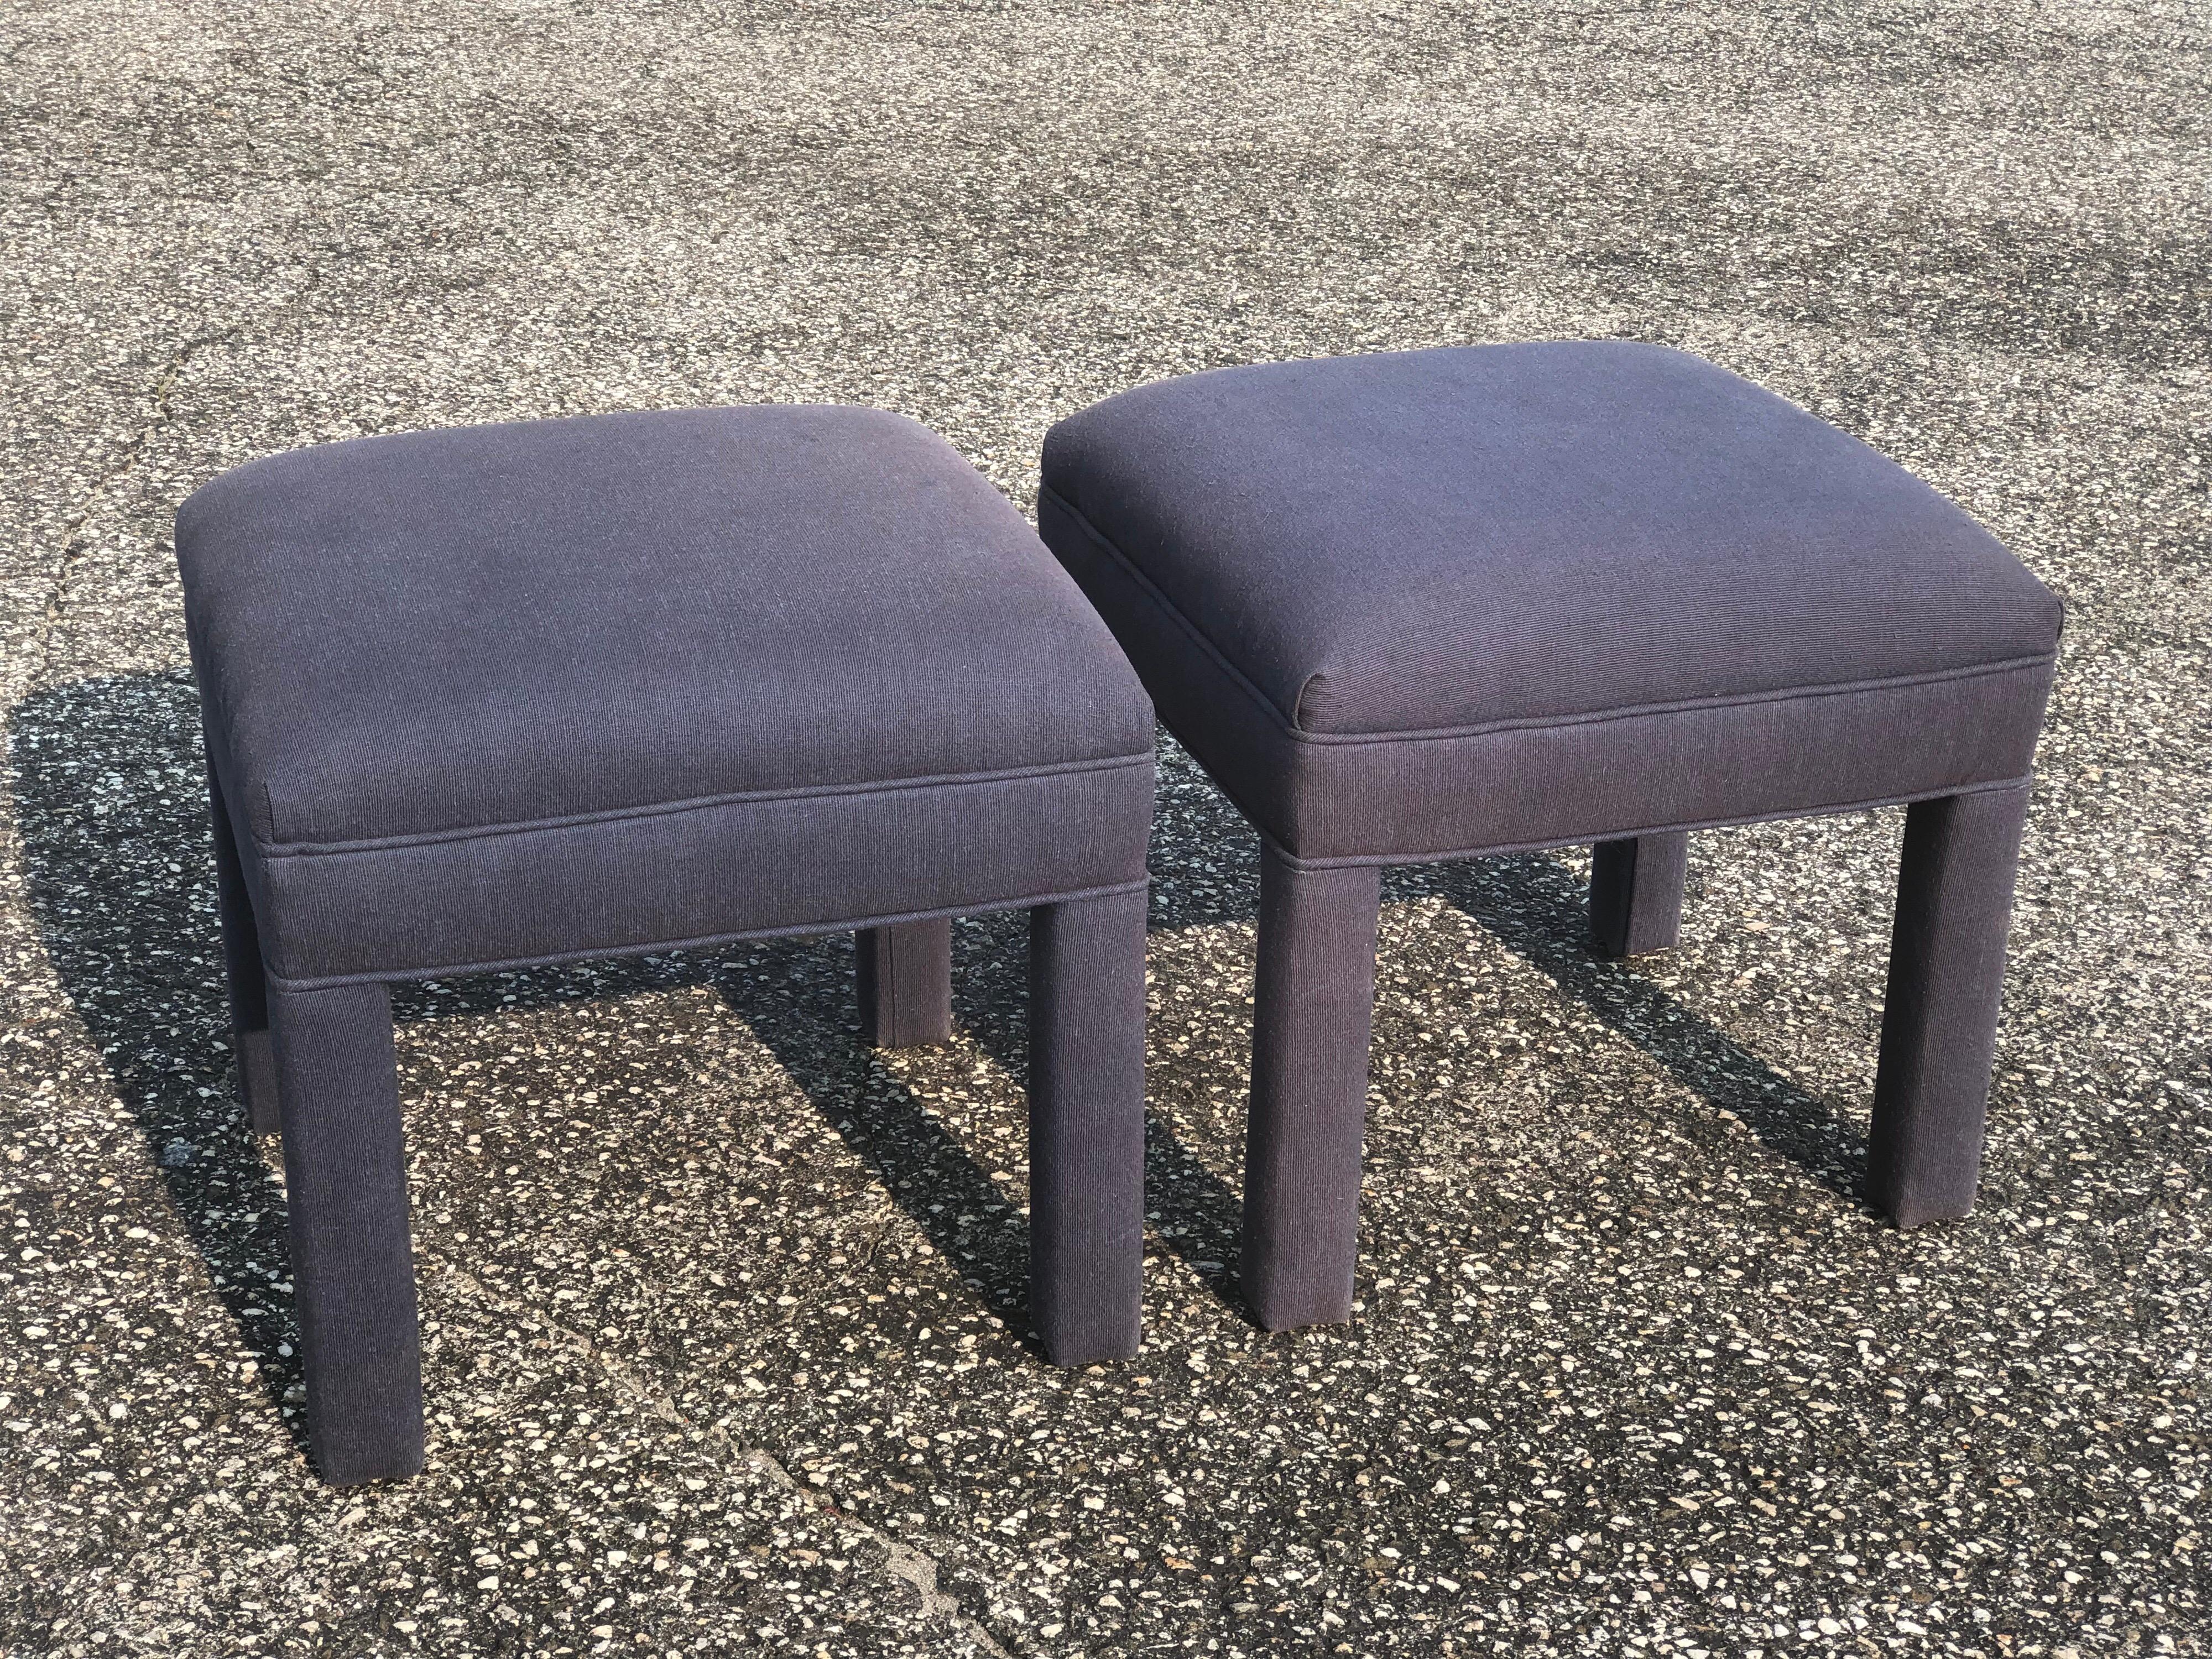 Pair of Royal blue upholstered ottomans in the parsons style. Simple Minimalist style. Perfect for under a console.